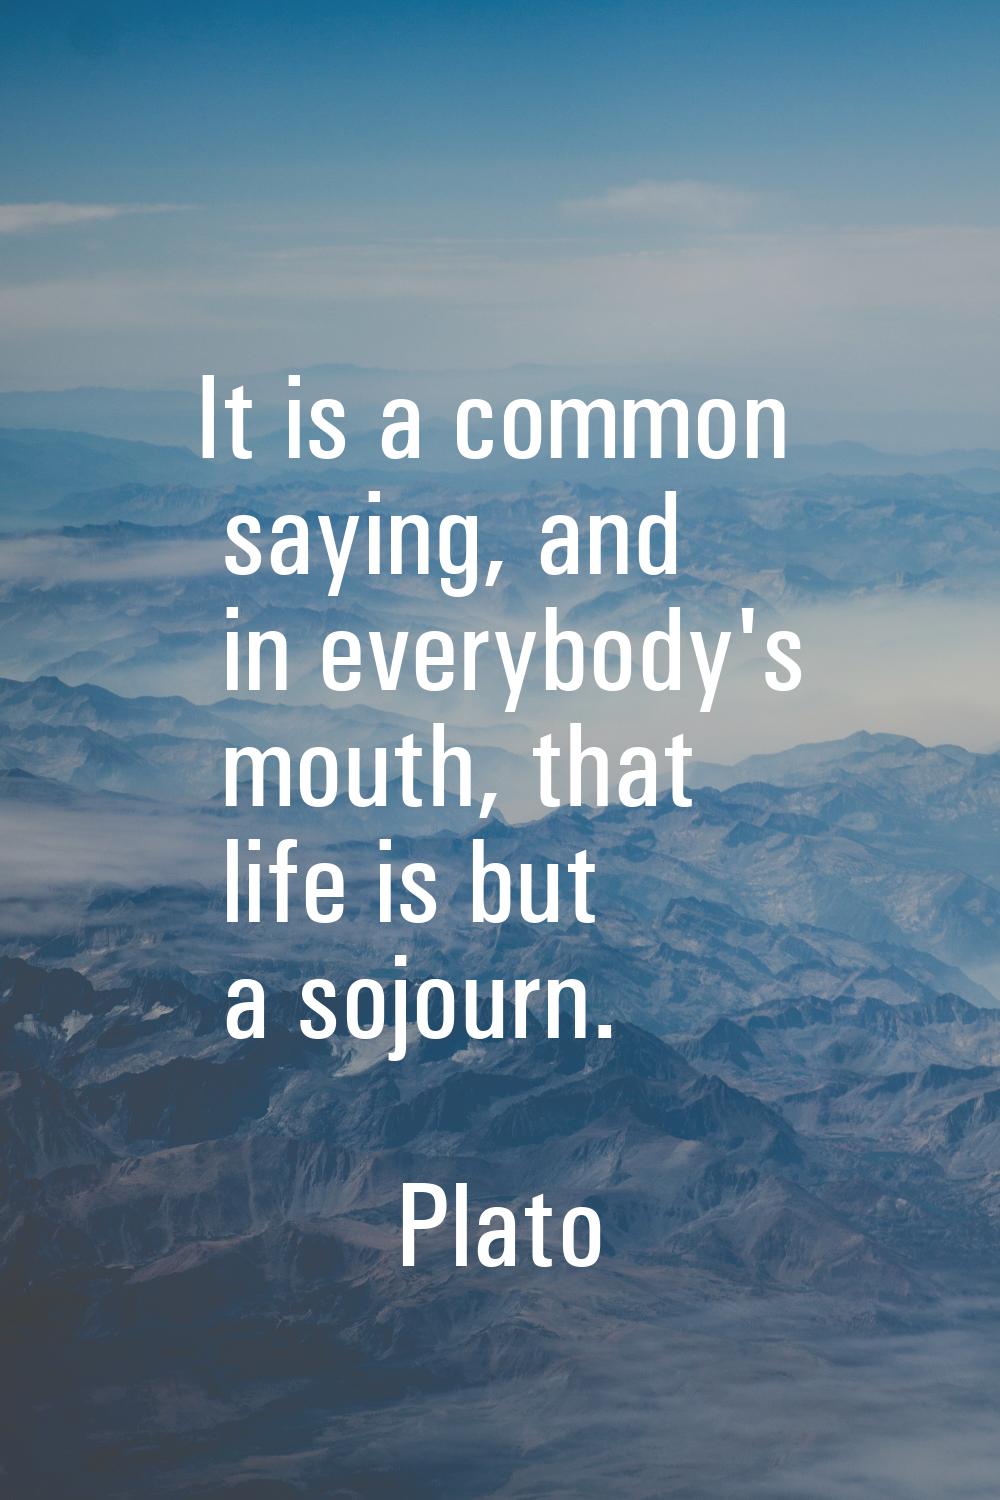 It is a common saying, and in everybody's mouth, that life is but a sojourn.